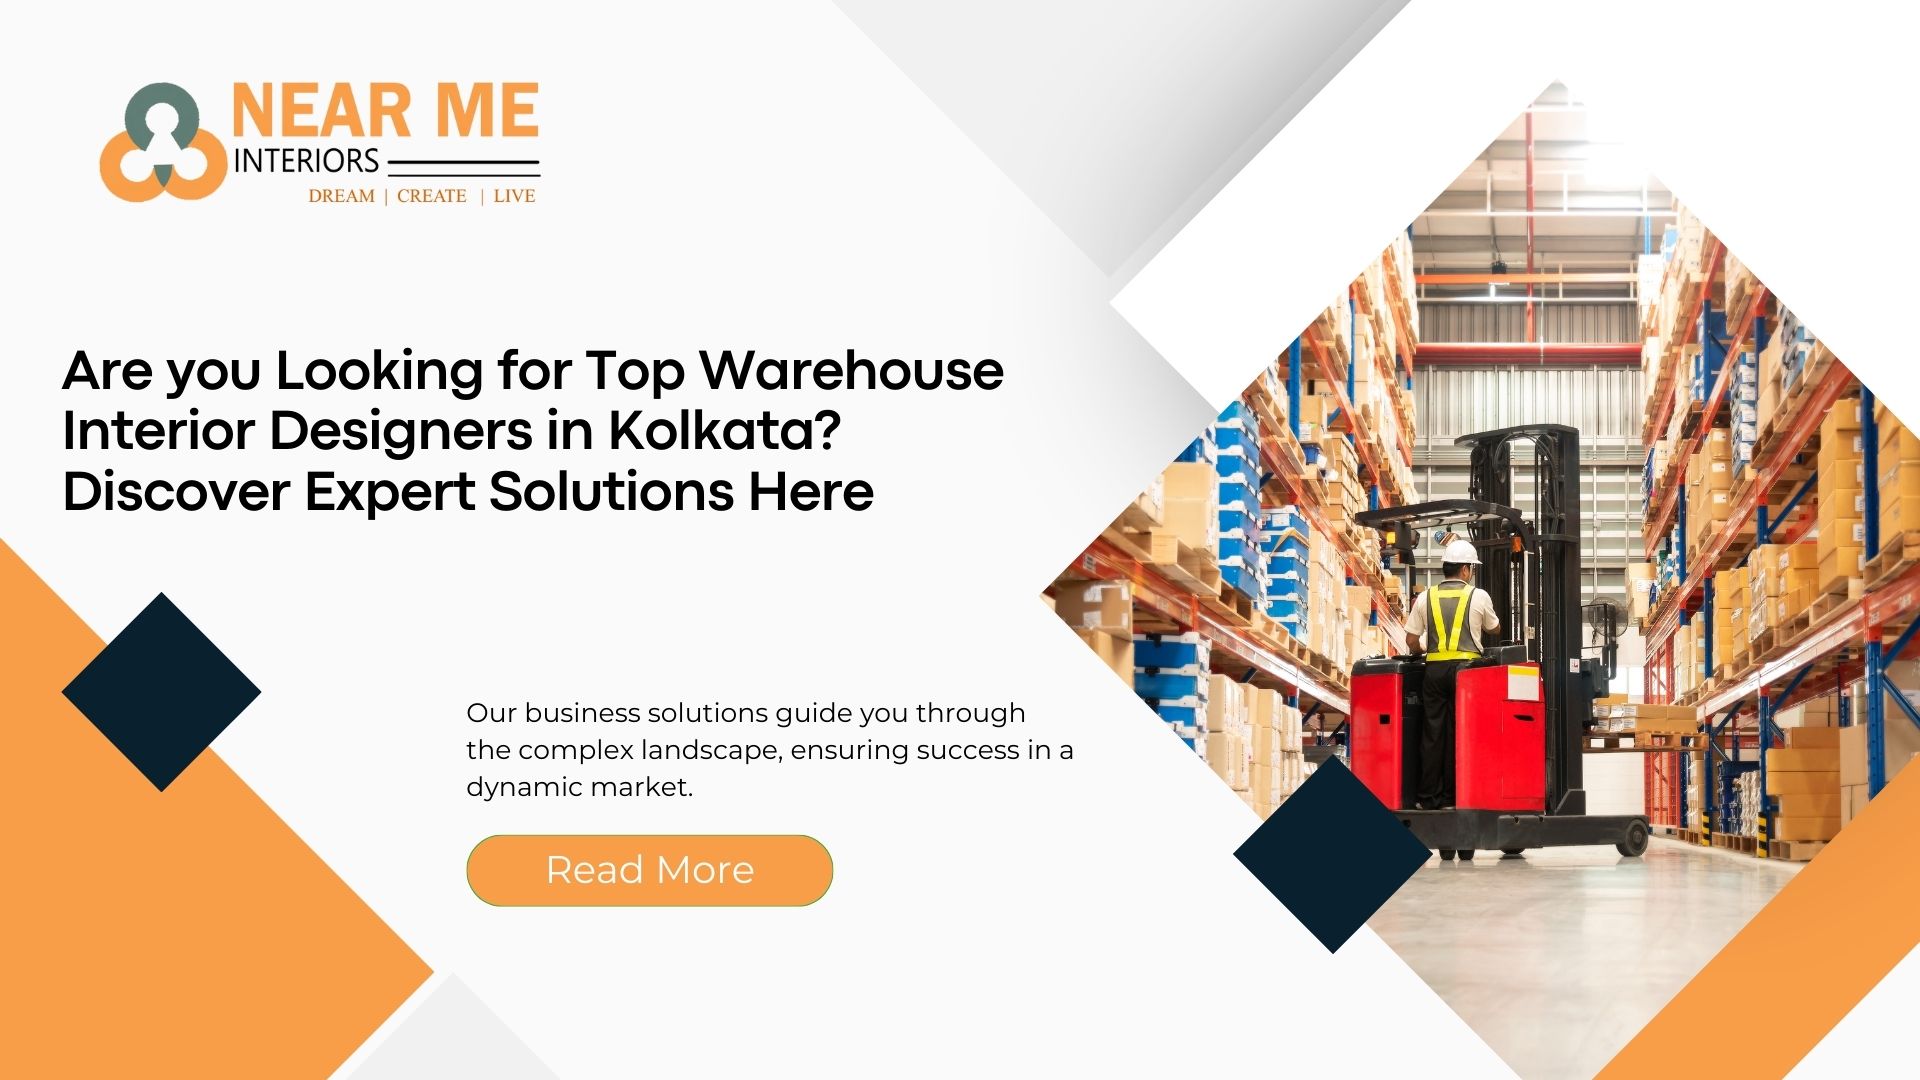 Are you Looking for Top Warehouse Interior Designers in Kolkata? Discover Expert Solutions Here